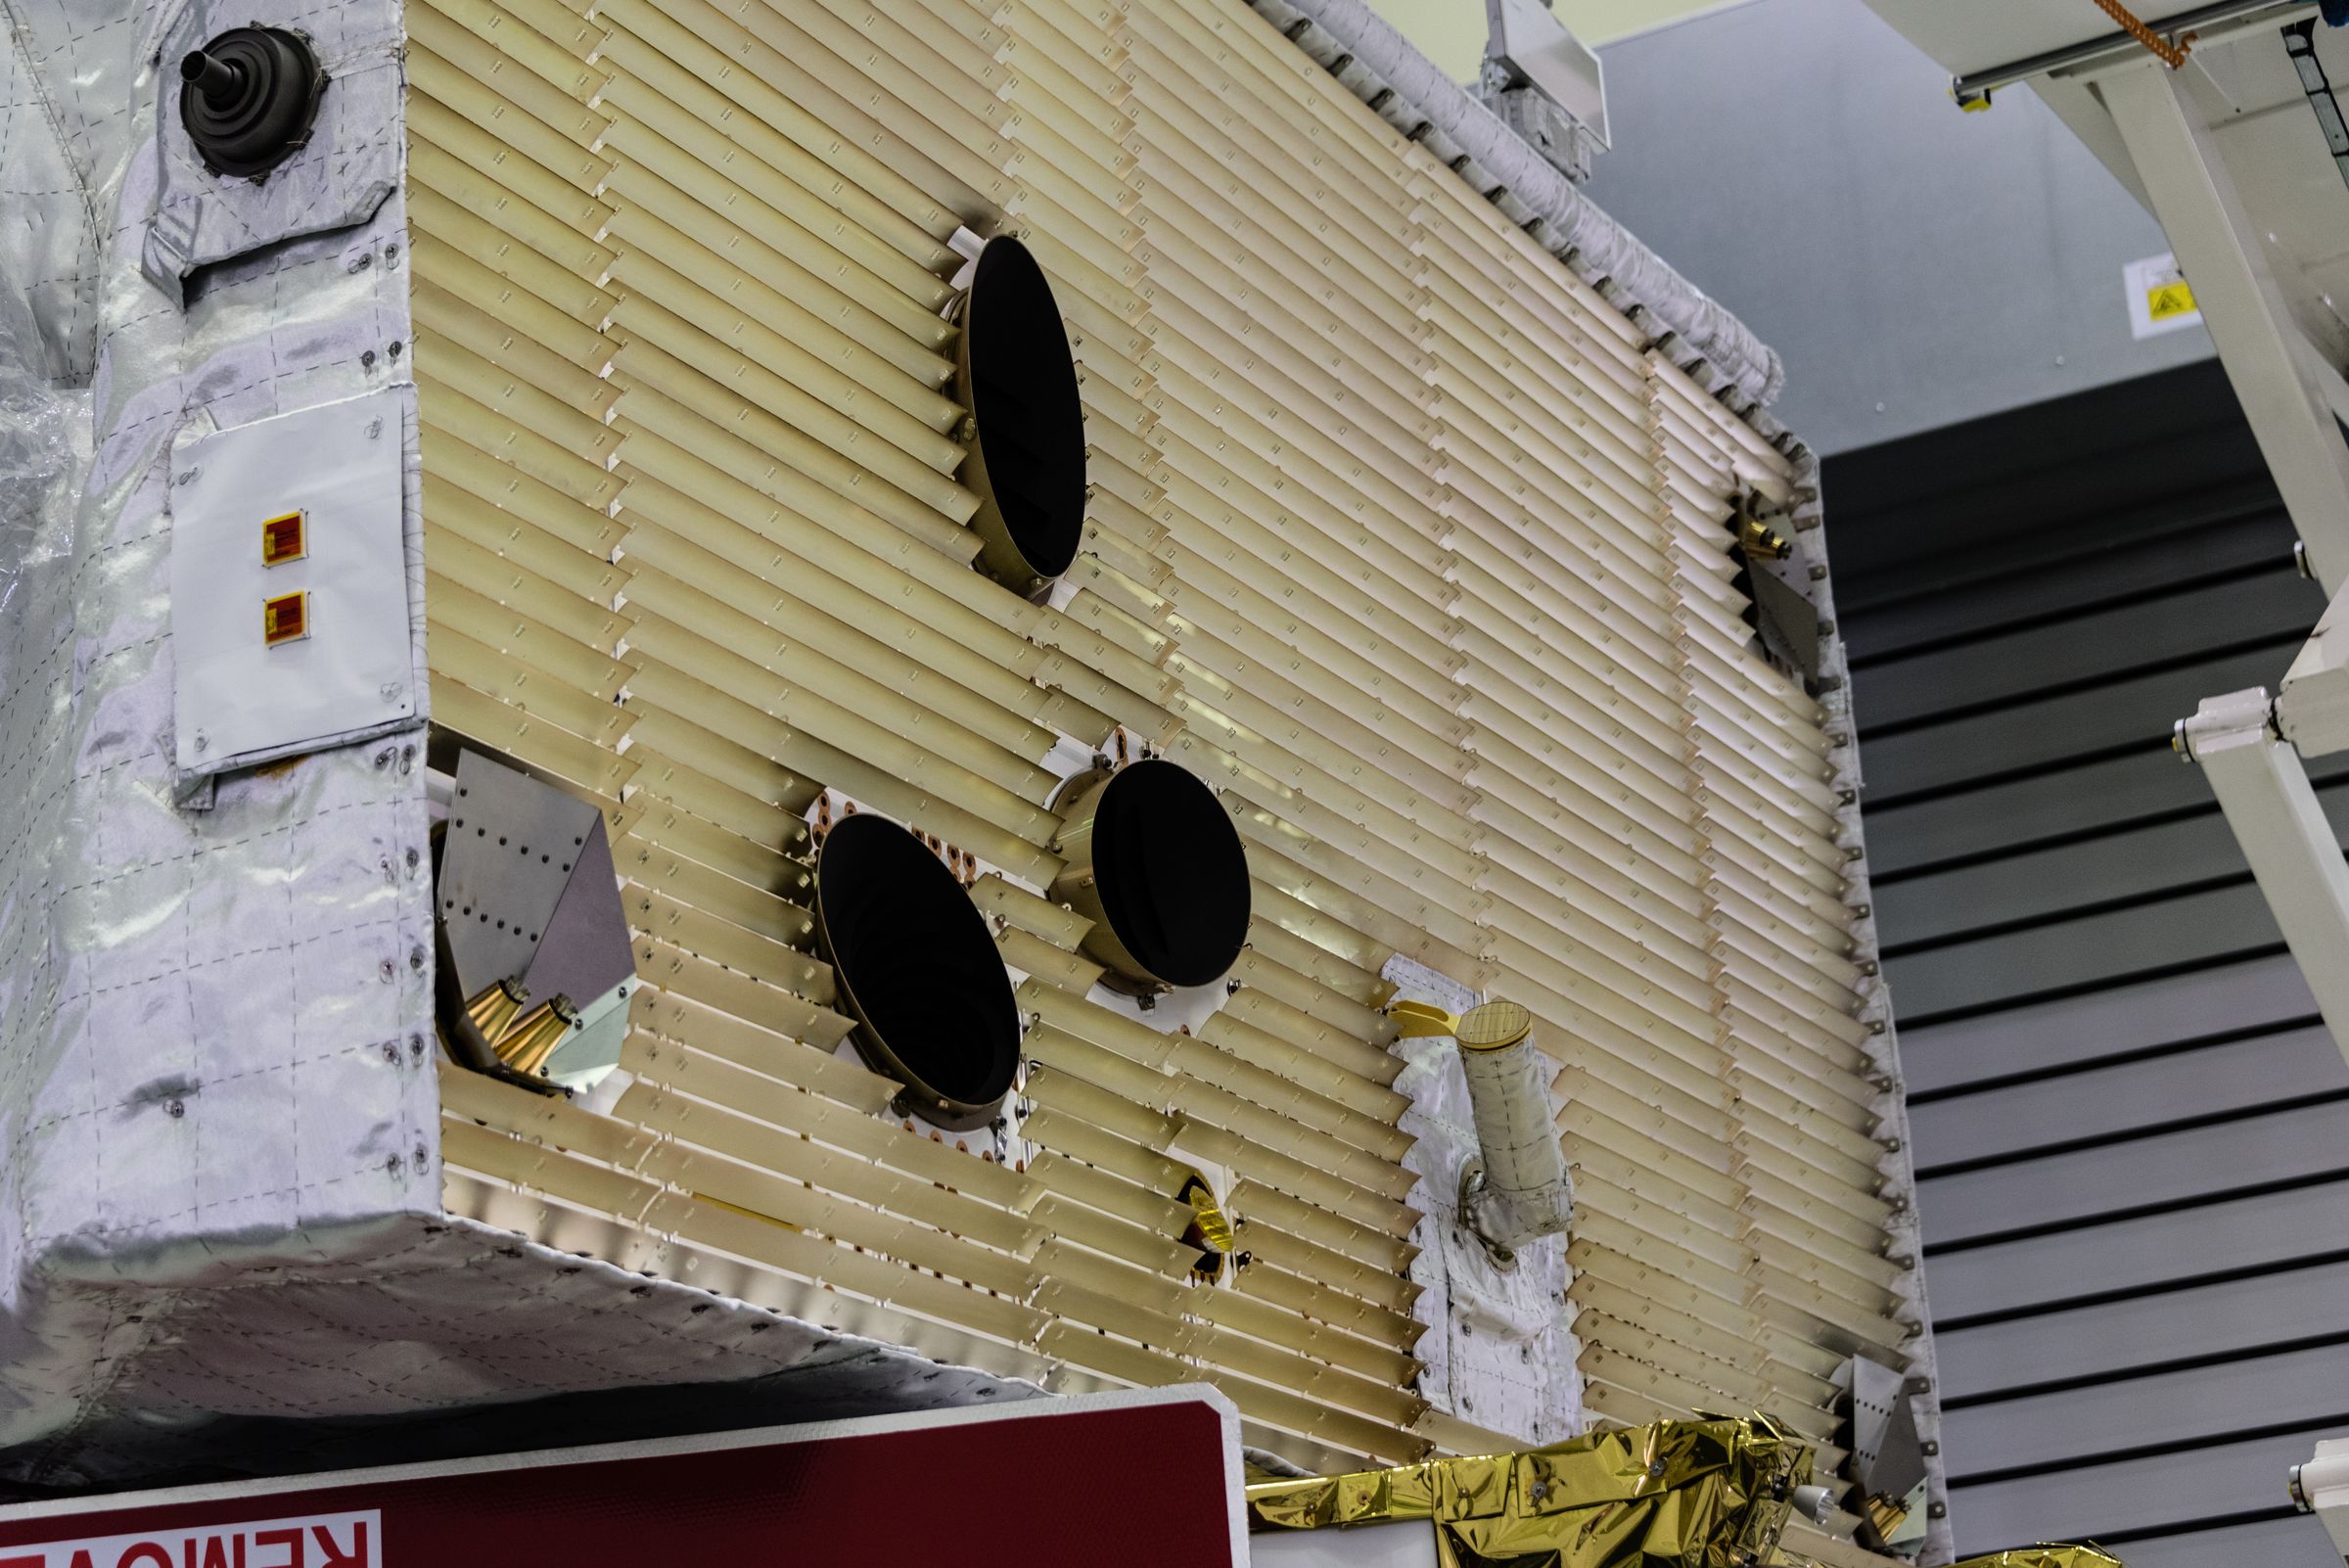 The radiator and instruments on the ESA’s orbiter.